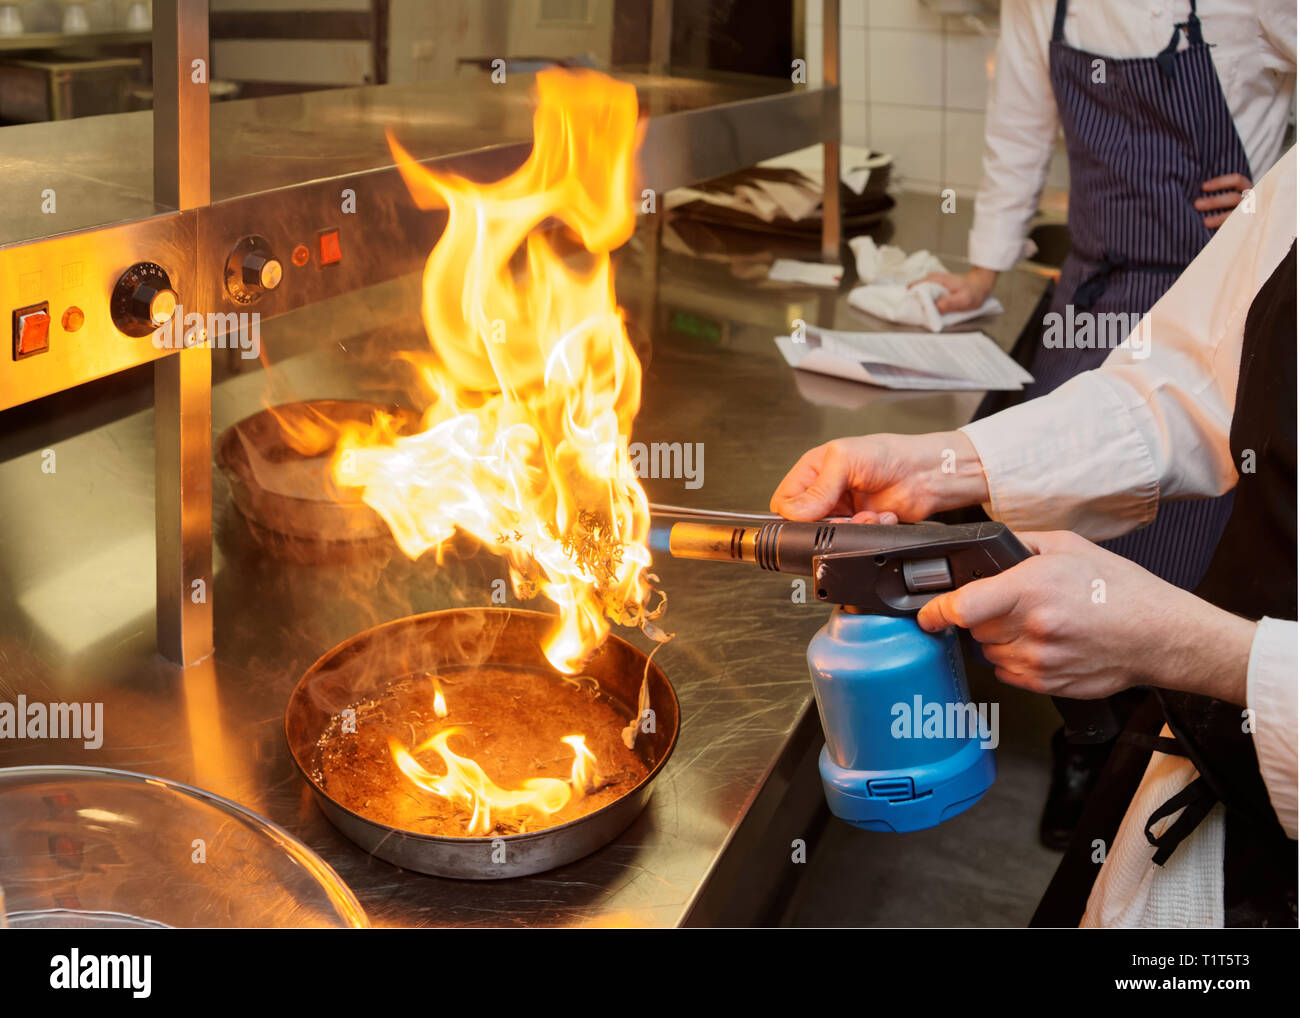 Chef is burning aromatic herbs to smoke a dish, commercial kitchen ...